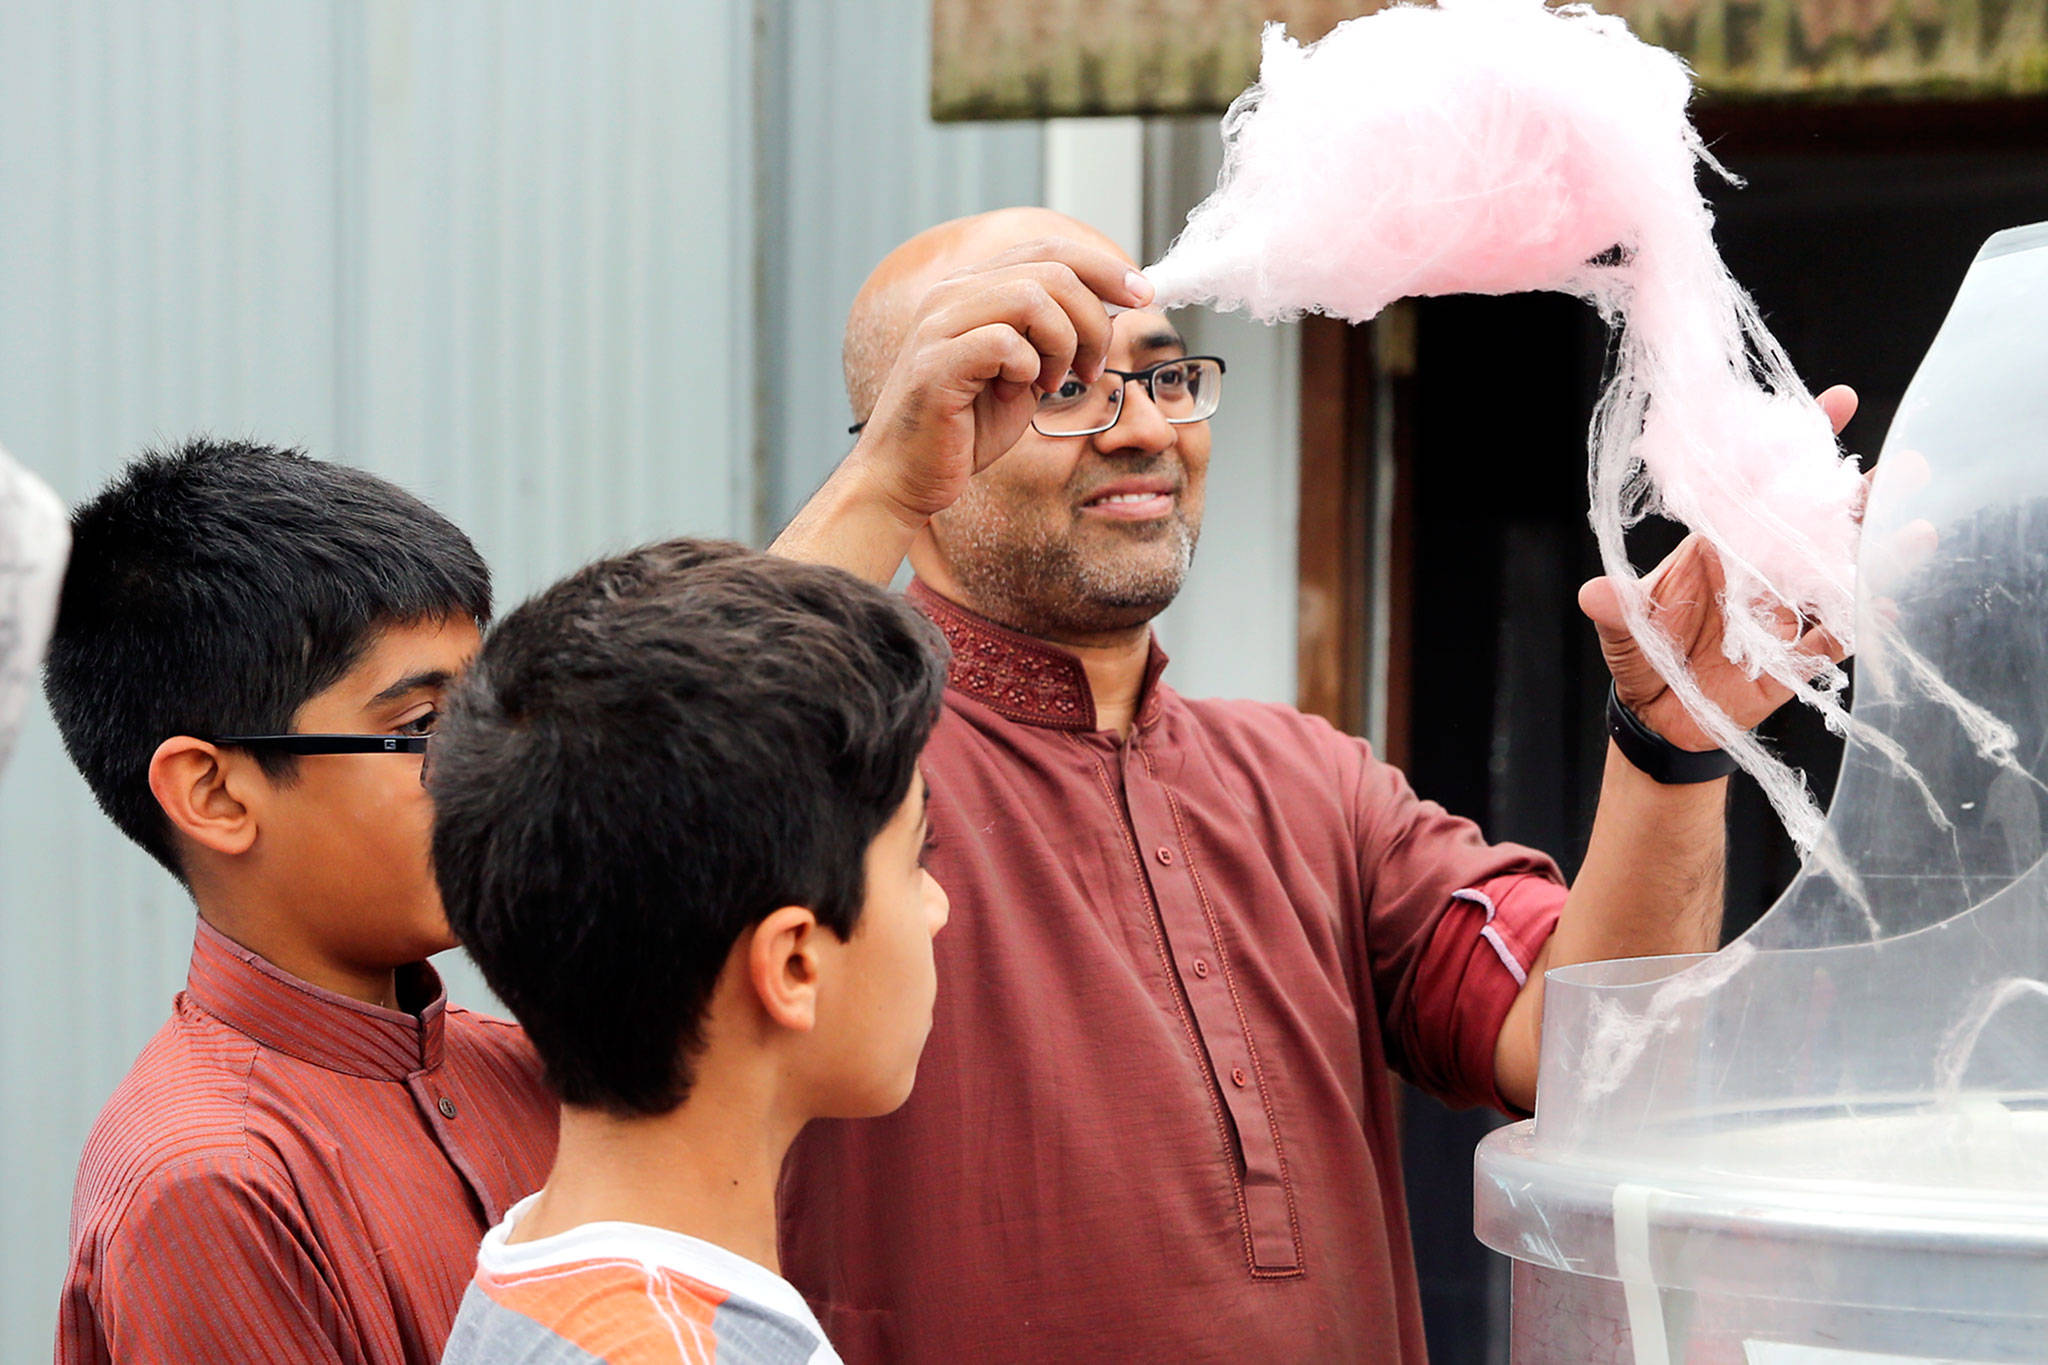 Masroor Syed gathers cotton candy Sunday morning at a block party hosted by the Husayniah Islamic Society of Seattle in Snohomish. (Kevin Clark / The Herald)